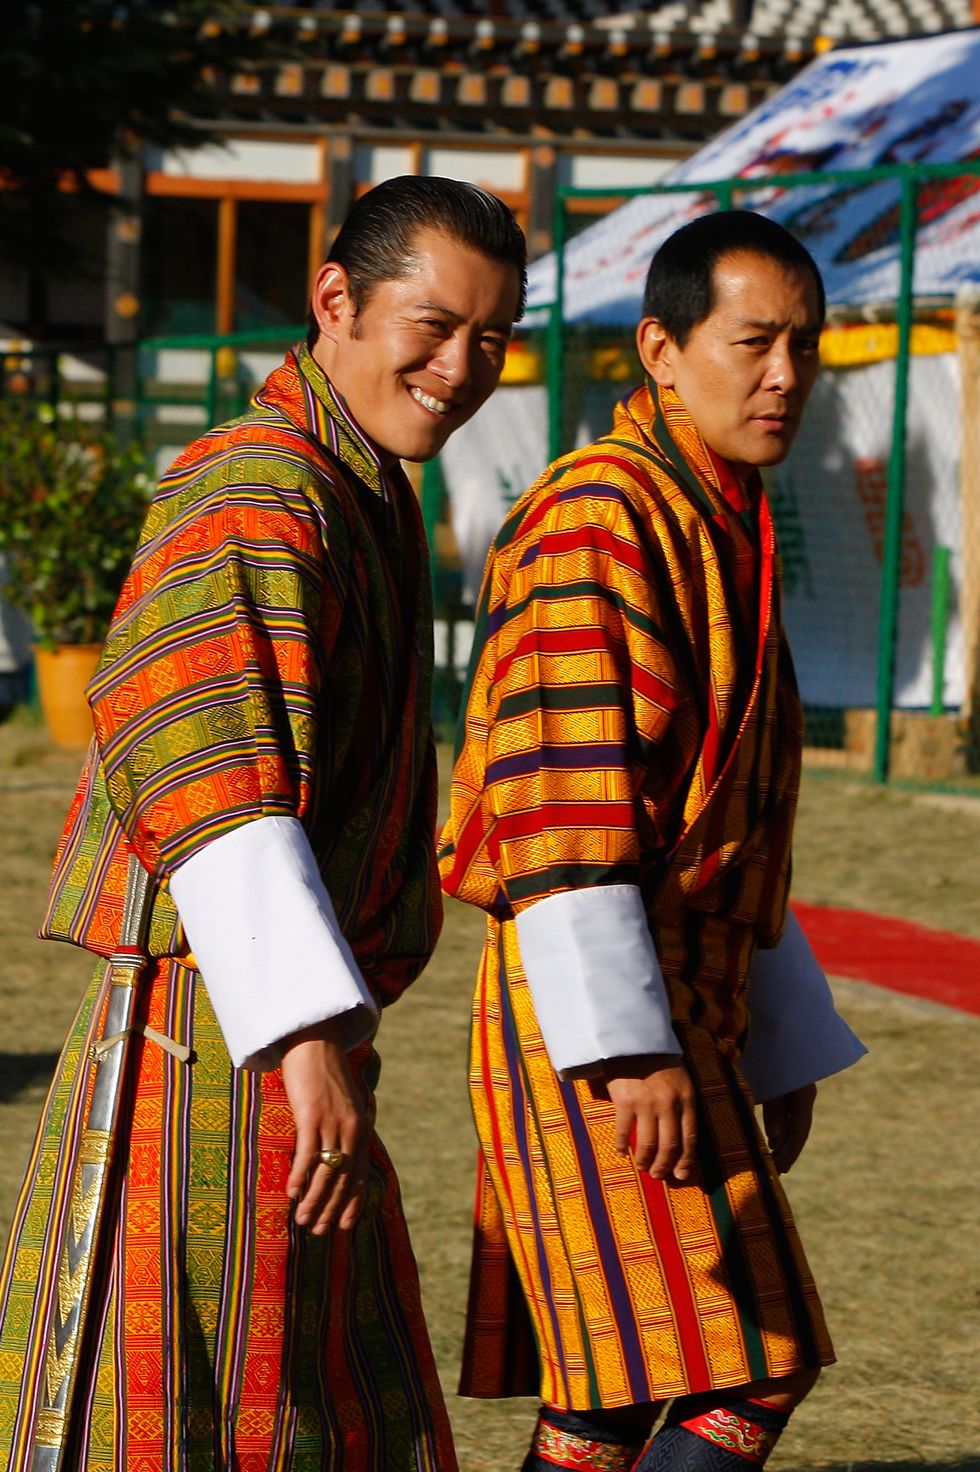 bhutan crowns the world's youngest monarch